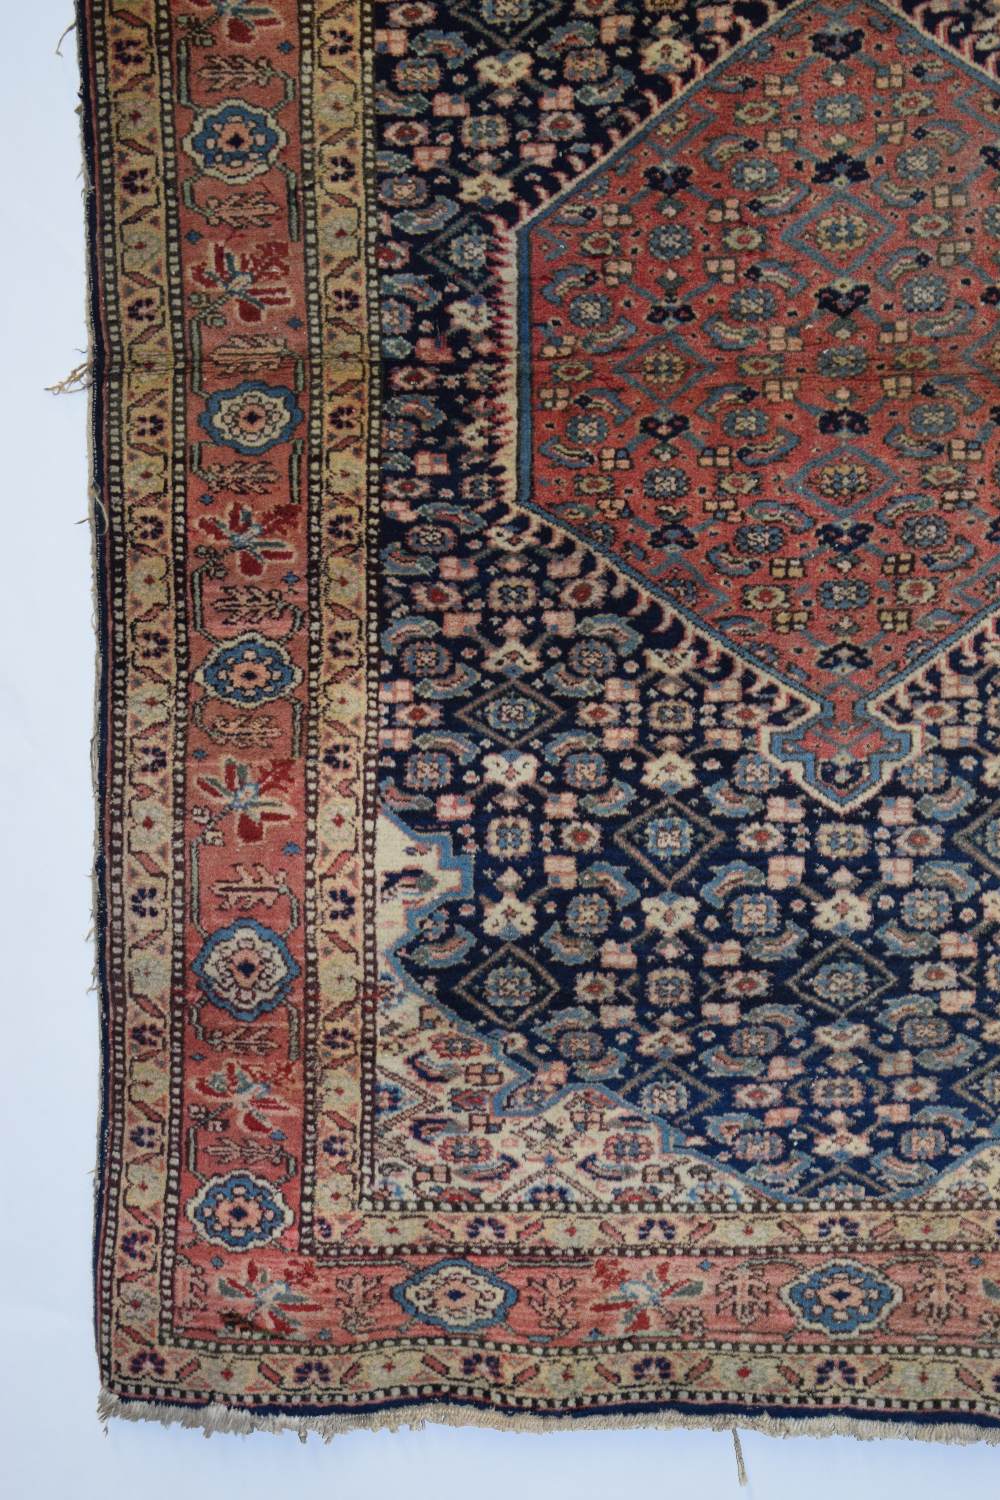 North west Persian rug, Ardabil or Tabriz district, circa 1950s, 5ft. 2in. X 3ft. 7in. 1.58m. X 1. - Image 5 of 8